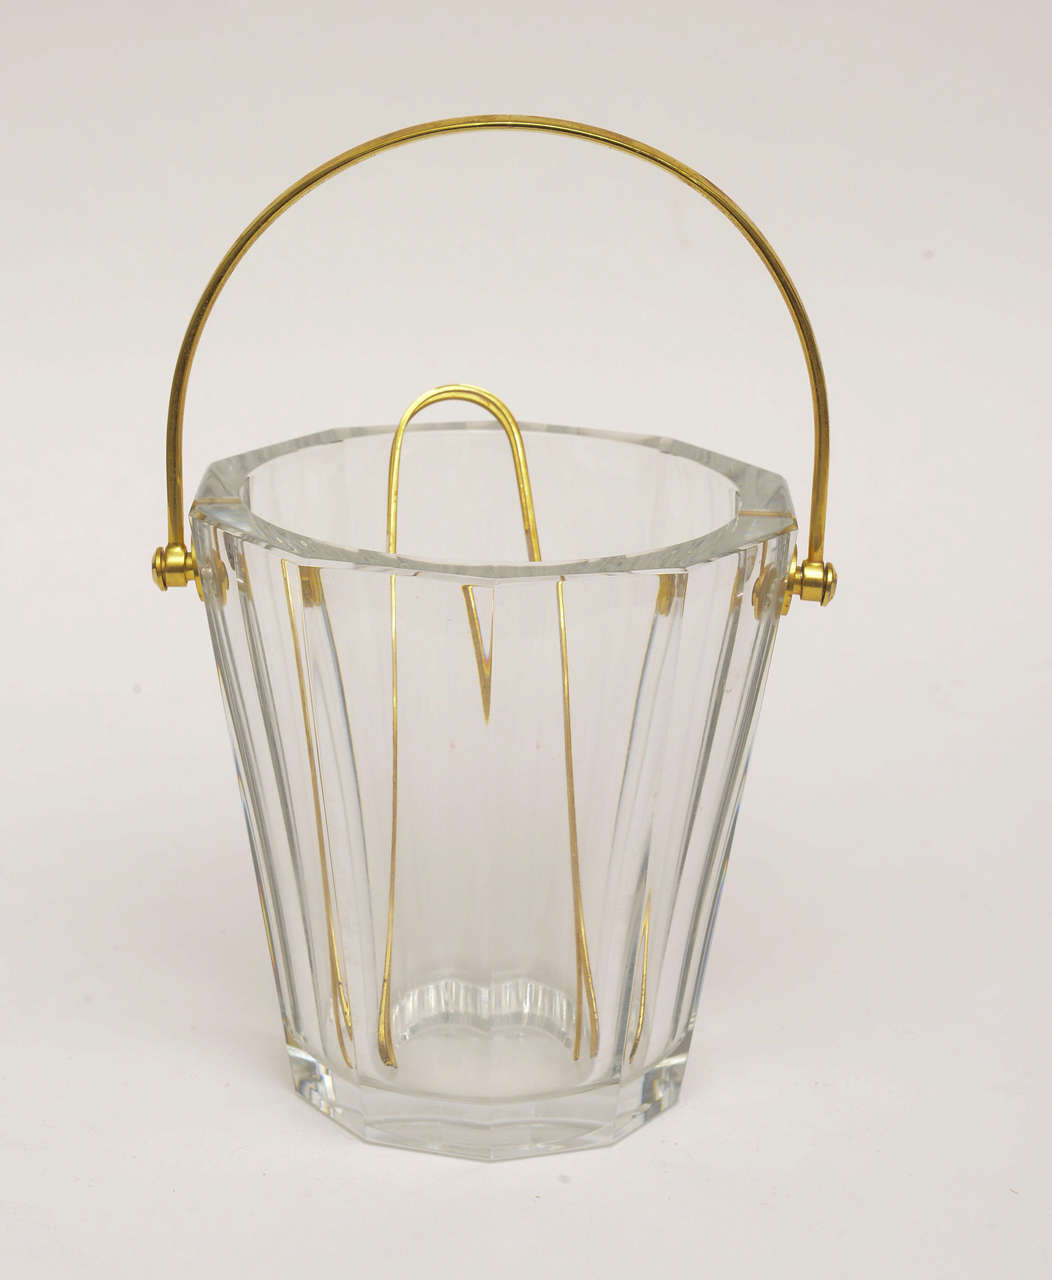 Always Classic, always timeless. This heavy lovely signed Baccarat crystal ice bucket or split champagne bucket has fluted columns.
Has heavy polished brass handle and thongs. They call this the butler ice bucket. It is 12